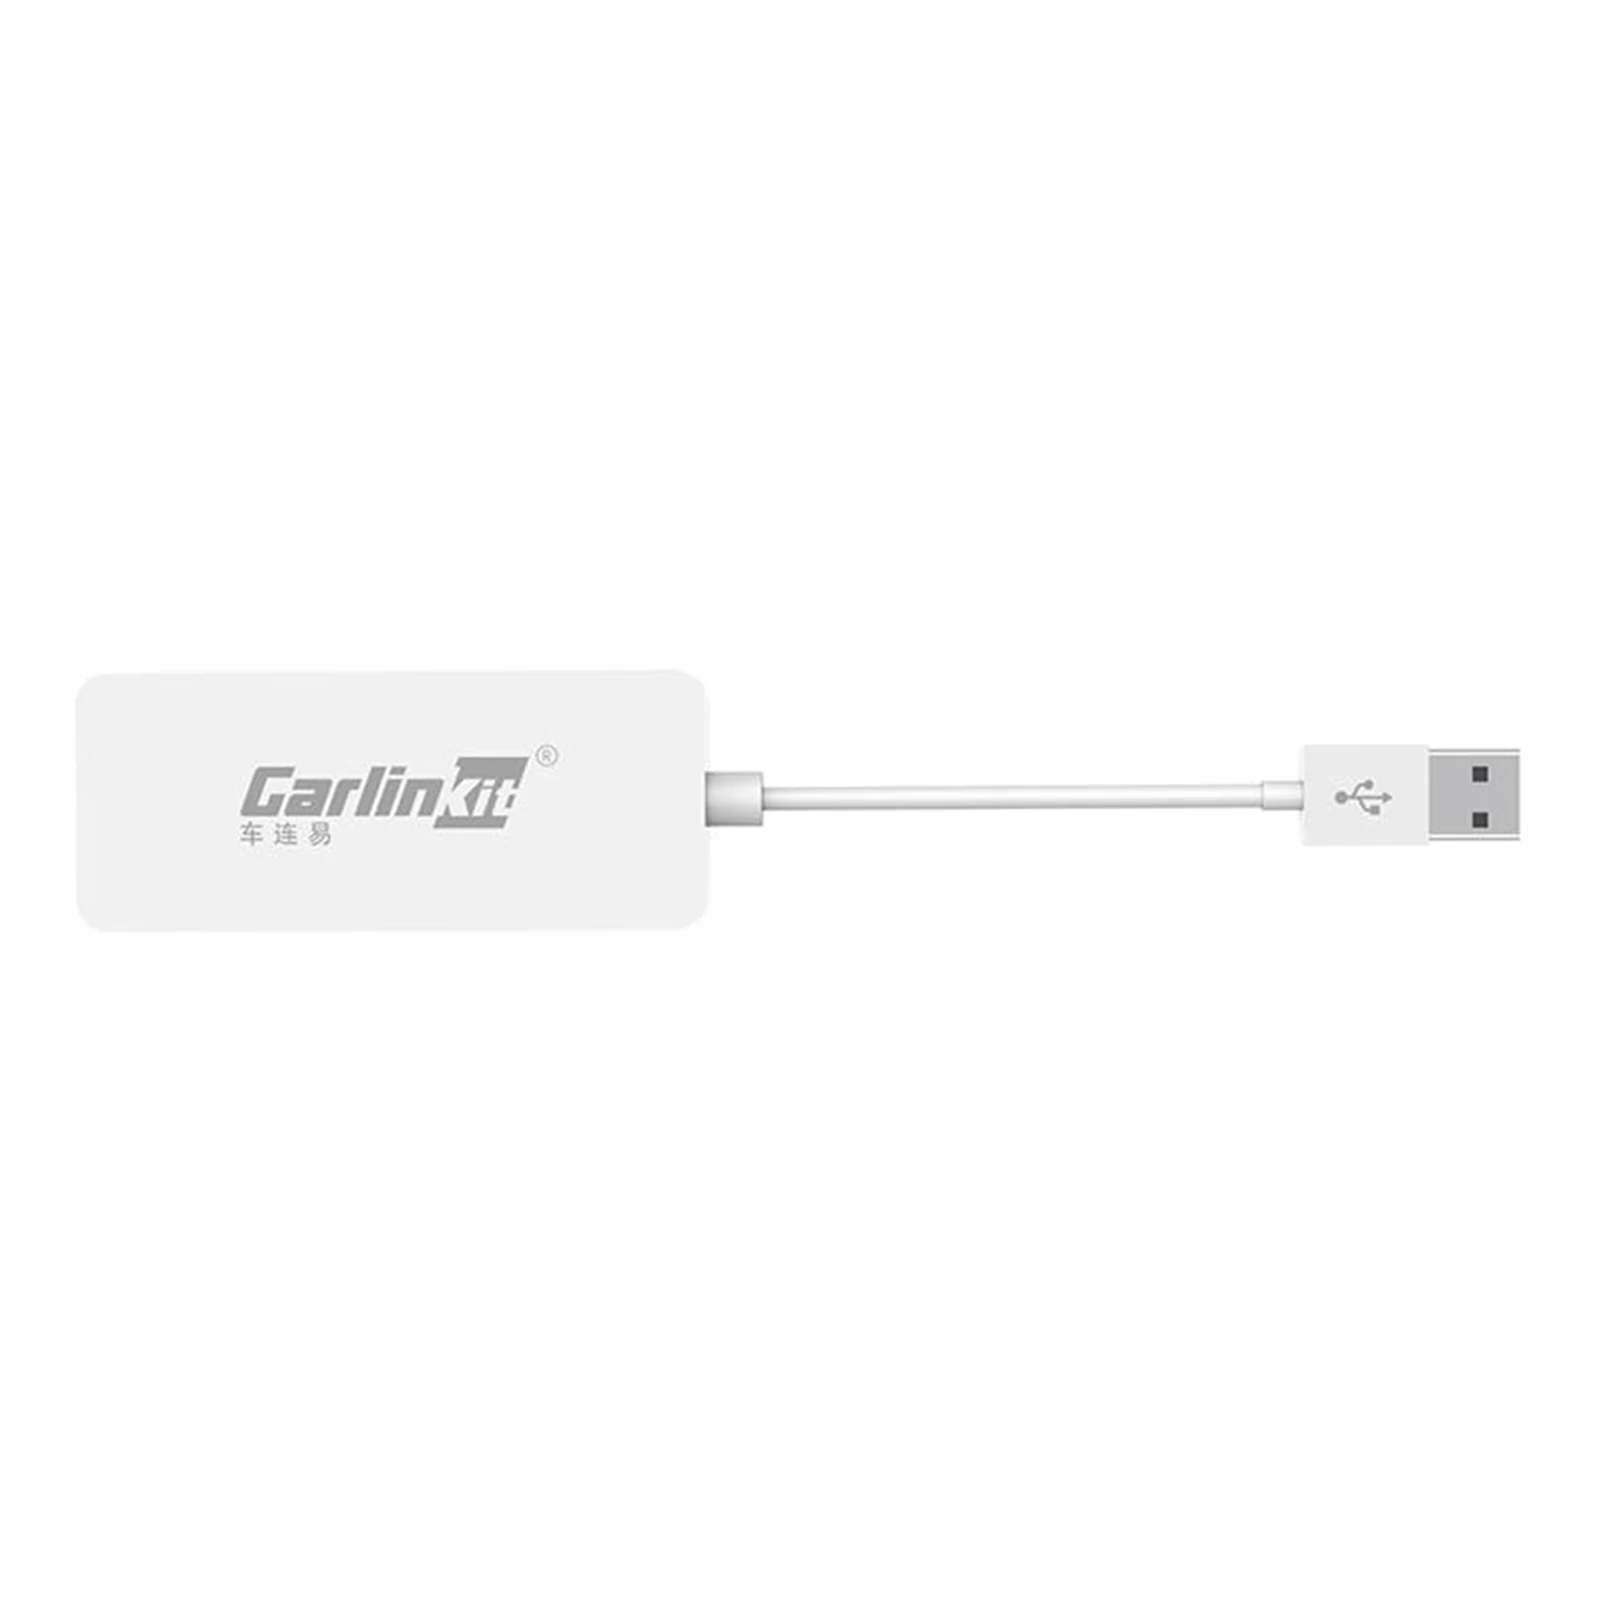 Hot Carlinkit  Adapter Wired Dongle Android Auto USB Dongle Car Play Smart Link For Navigation Player Radio Map, White